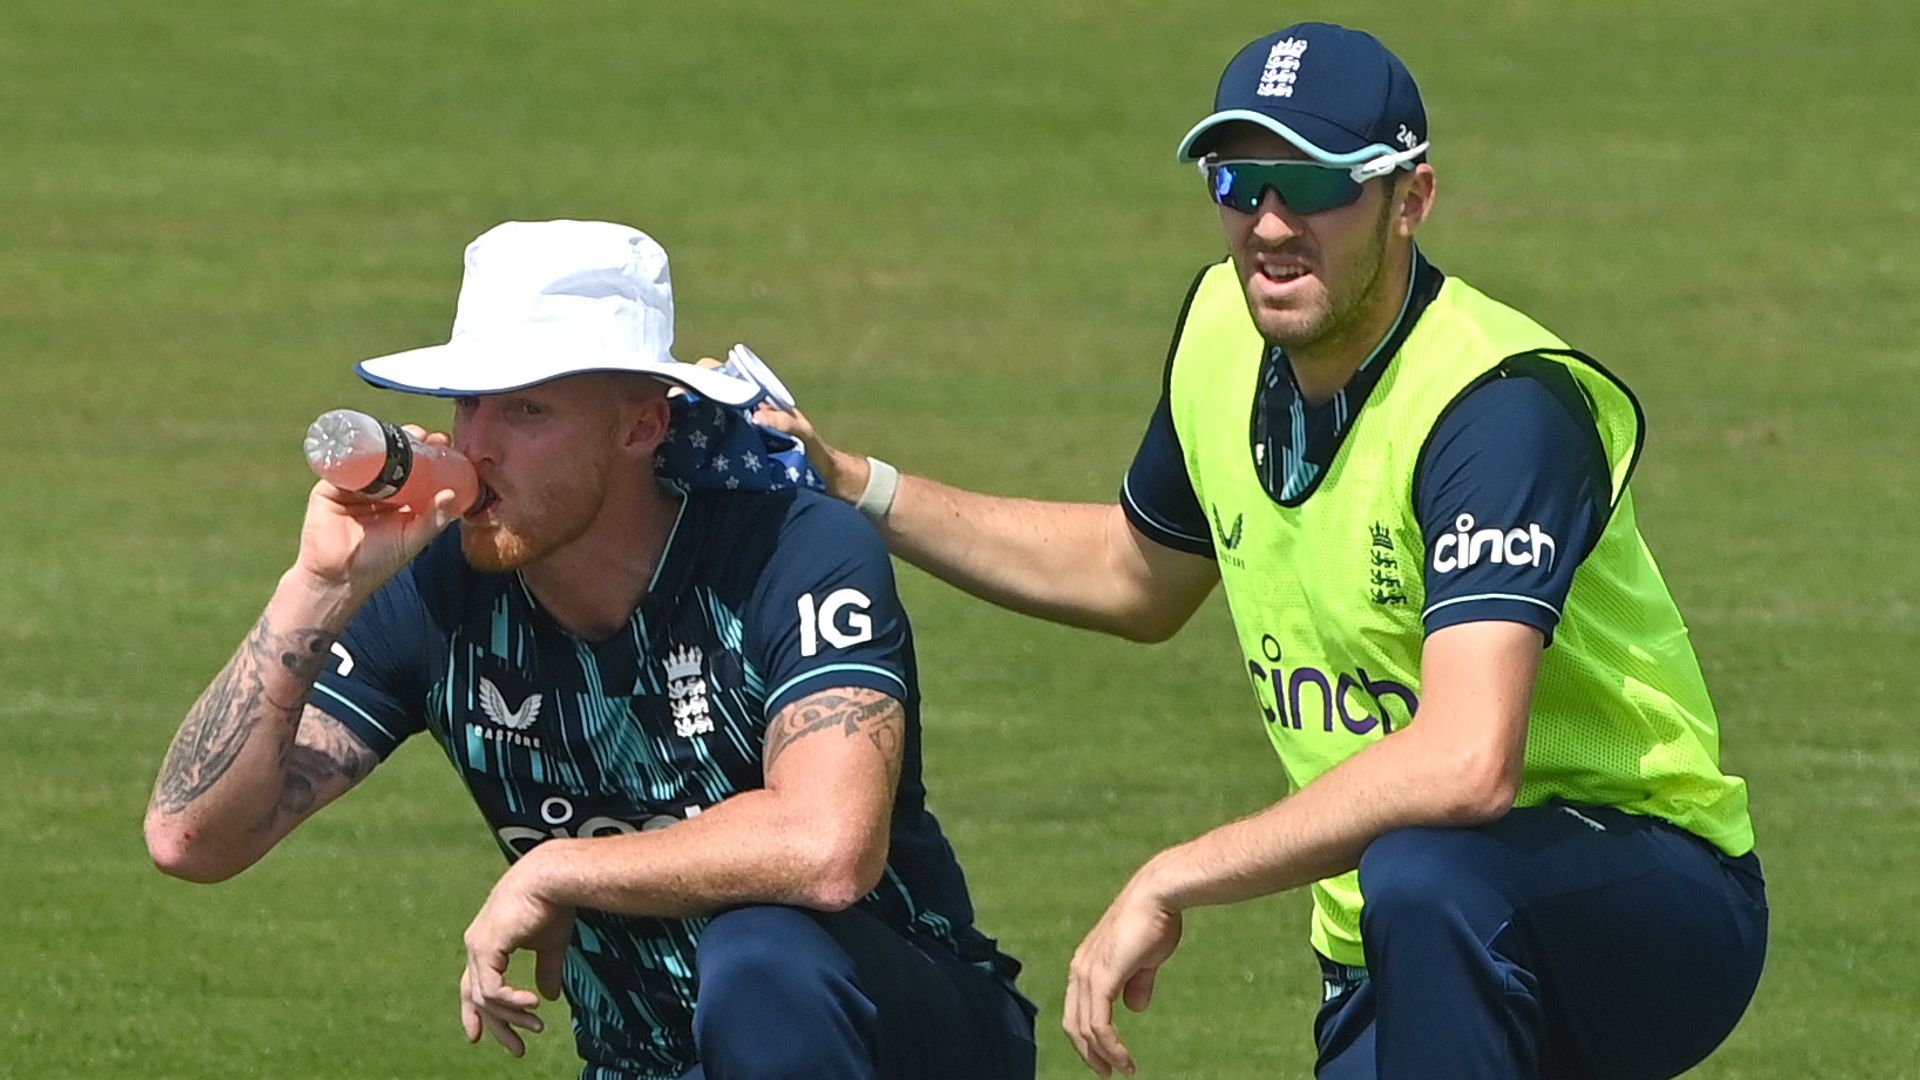 England and spectators feel the heat at sweltering Durham ODI